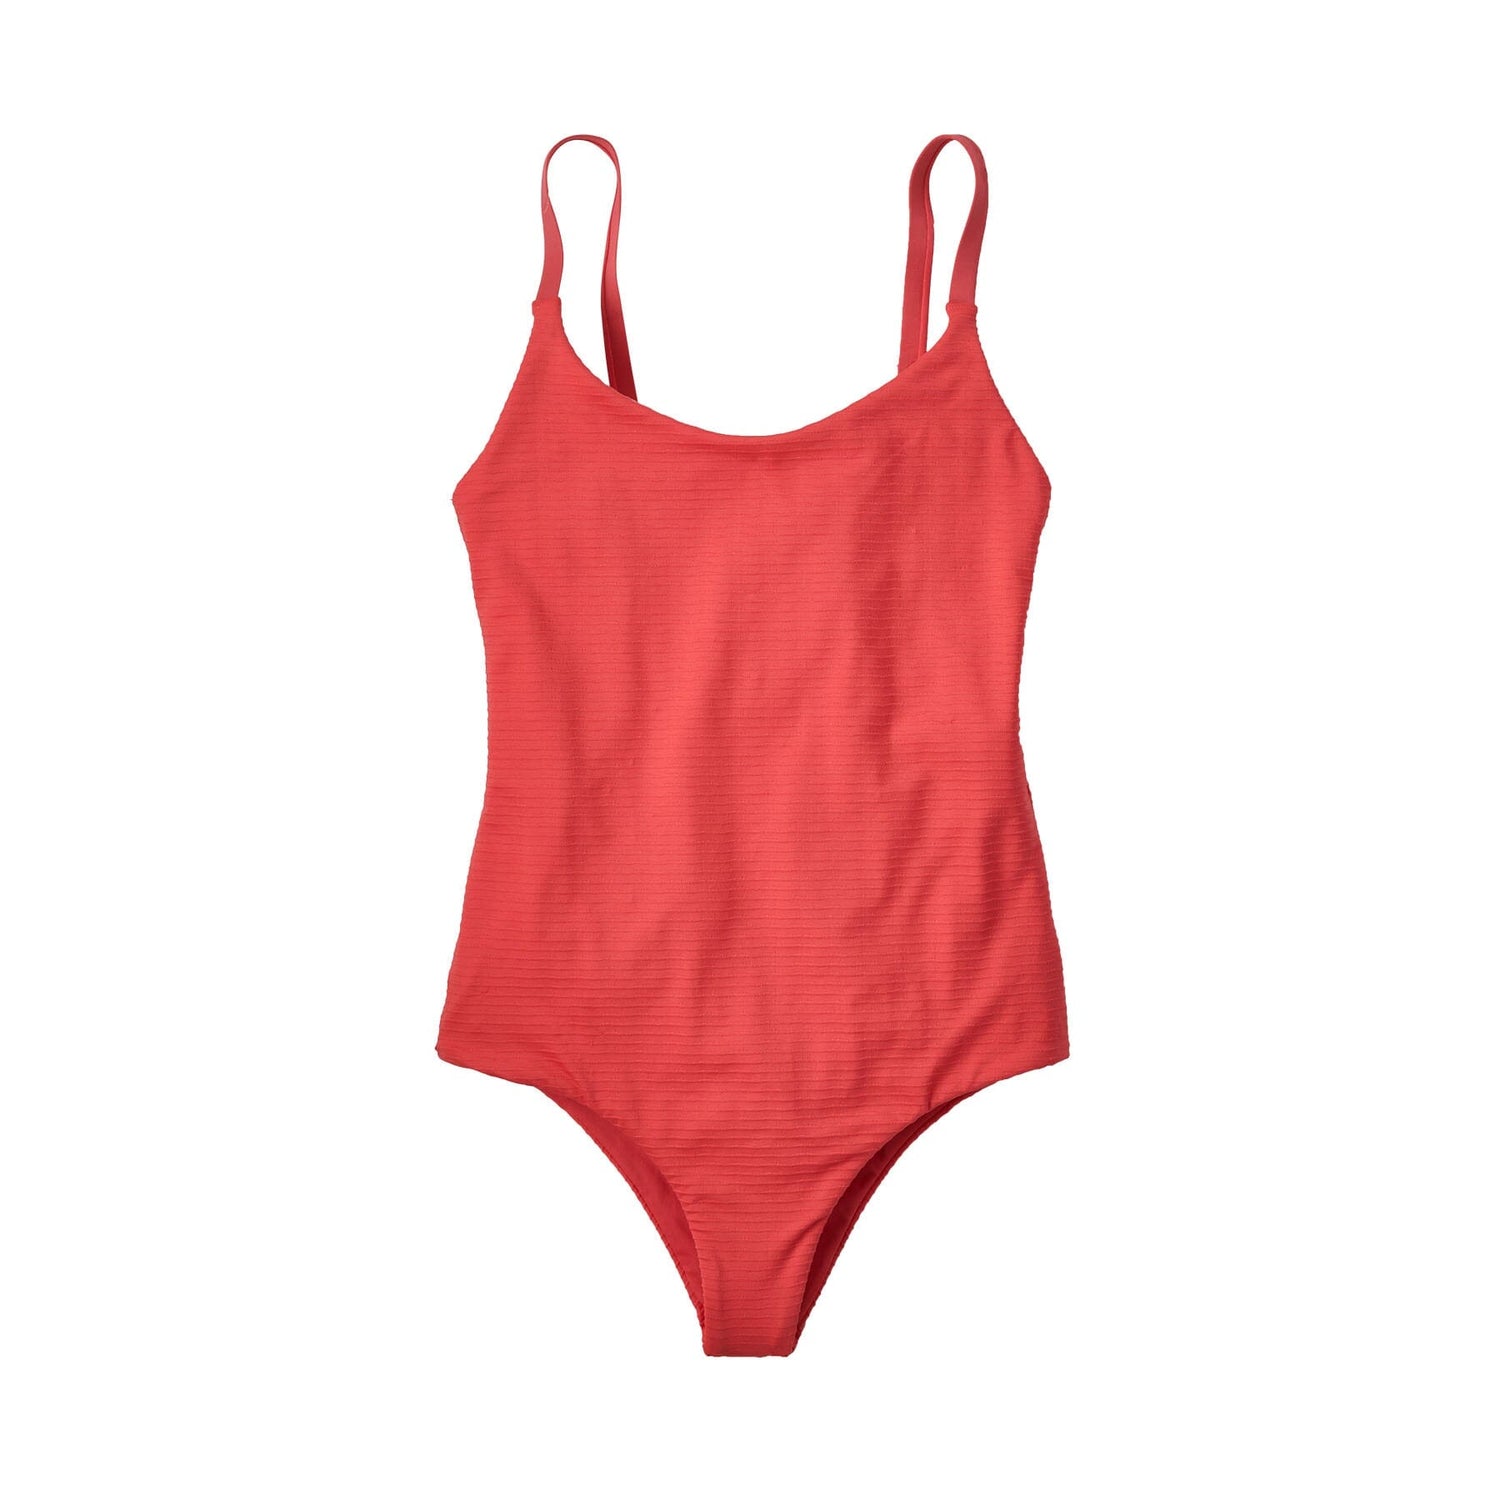 Patagonia W's Sunny Tide Swimsuit - Recycled Nylon Ripple: Coral Swimwear